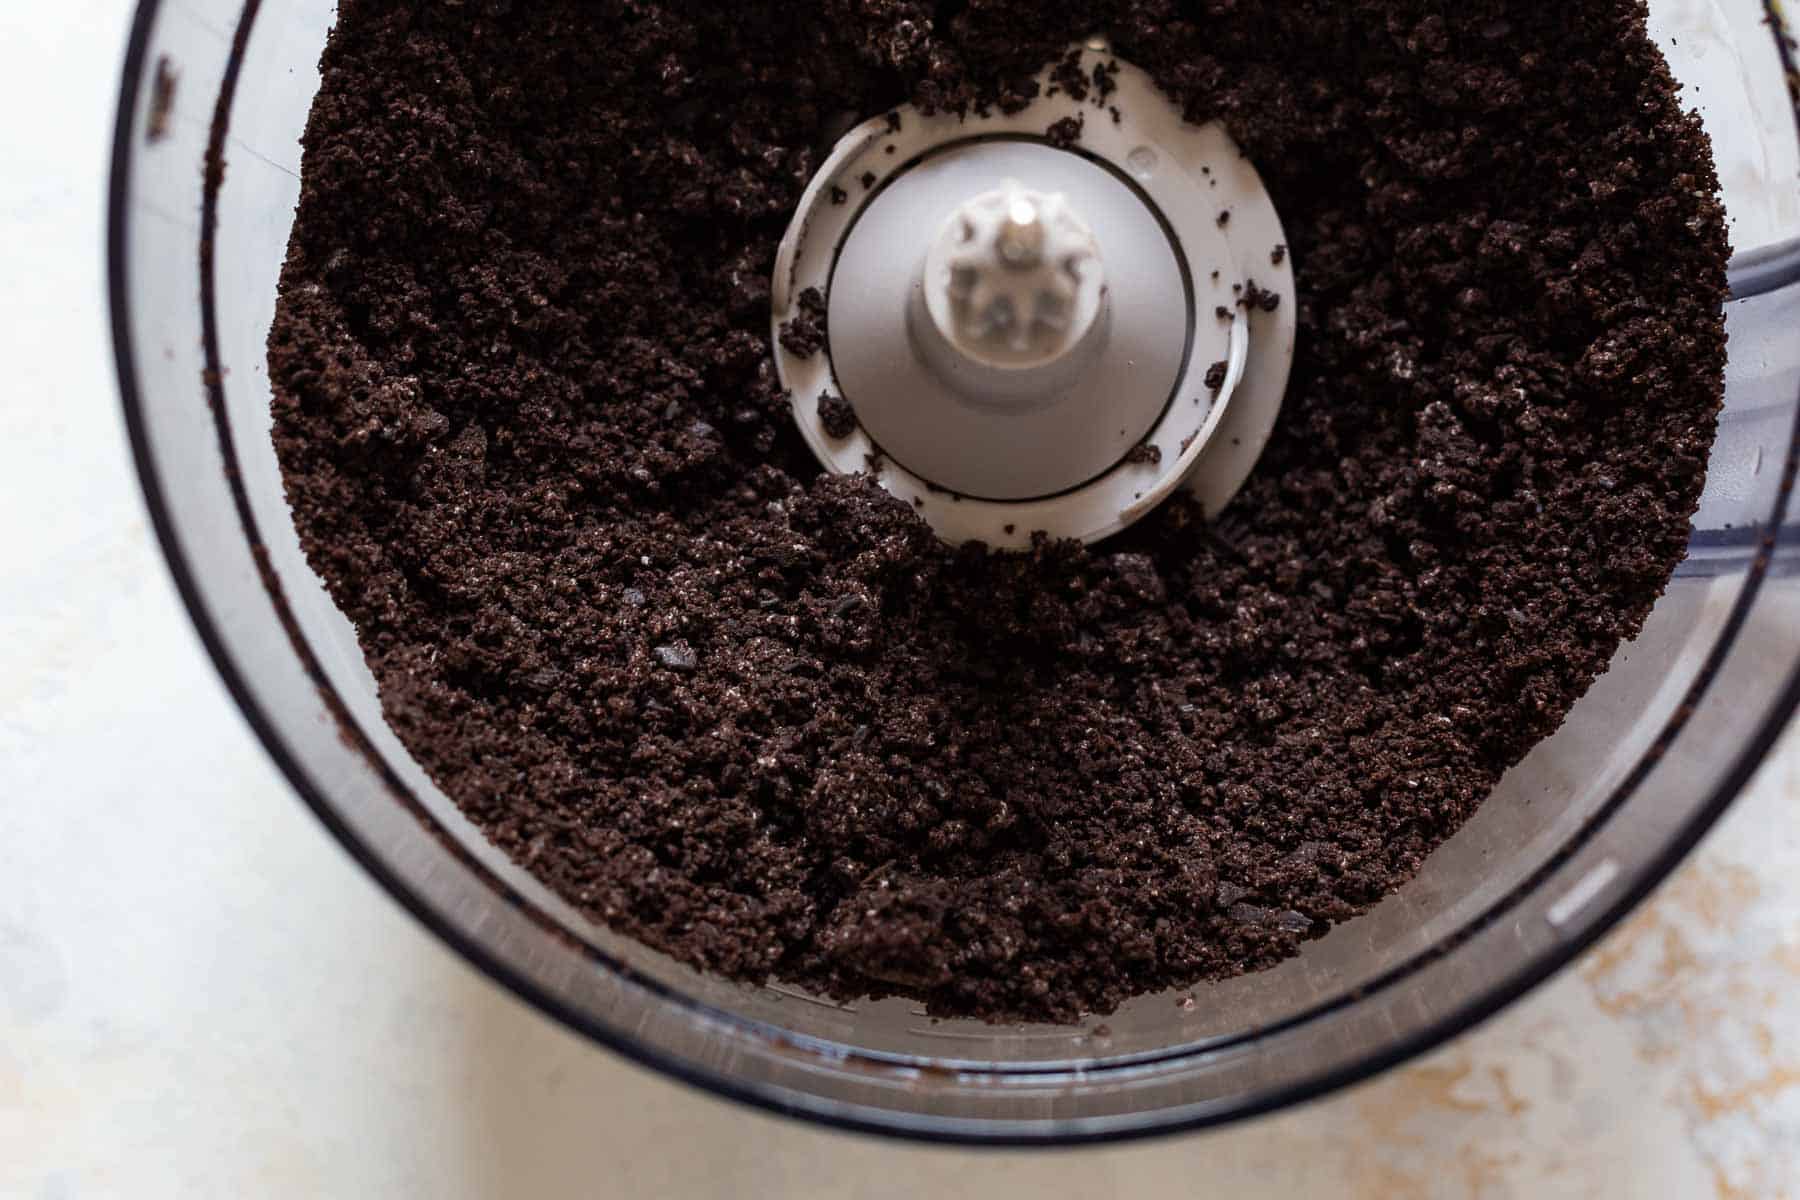 processed oreo crumbs in a food processor